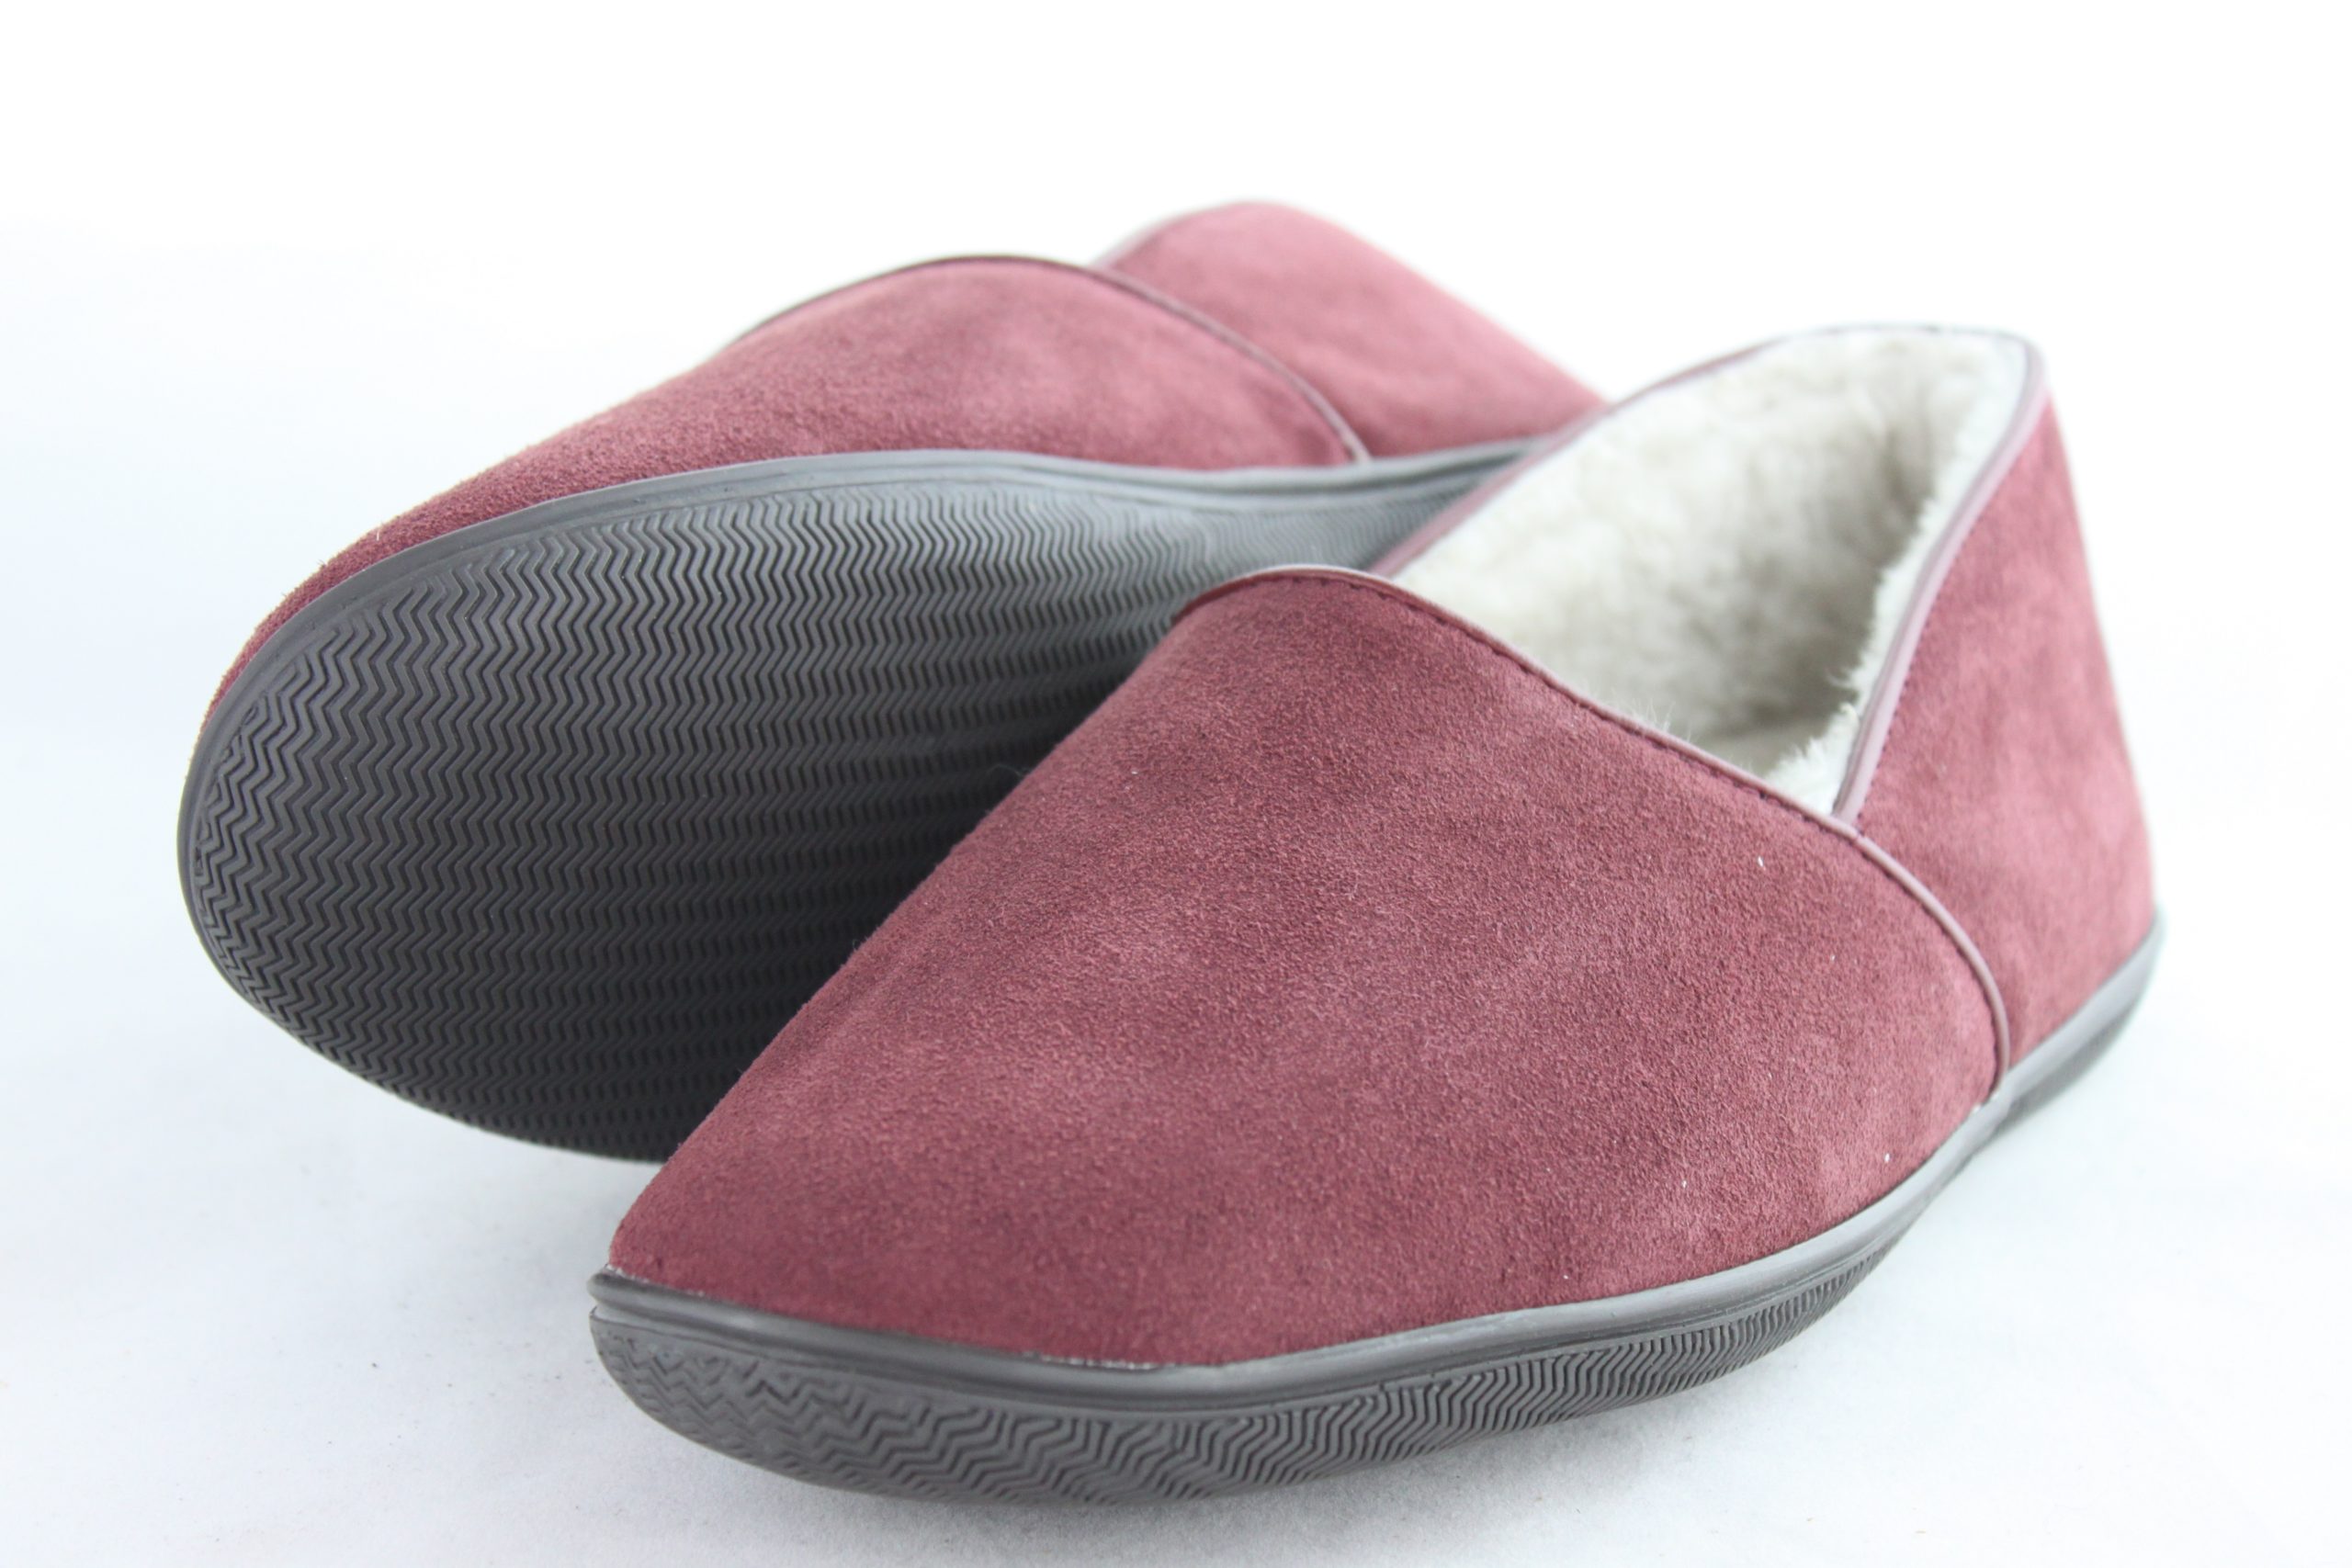 drapers slippers